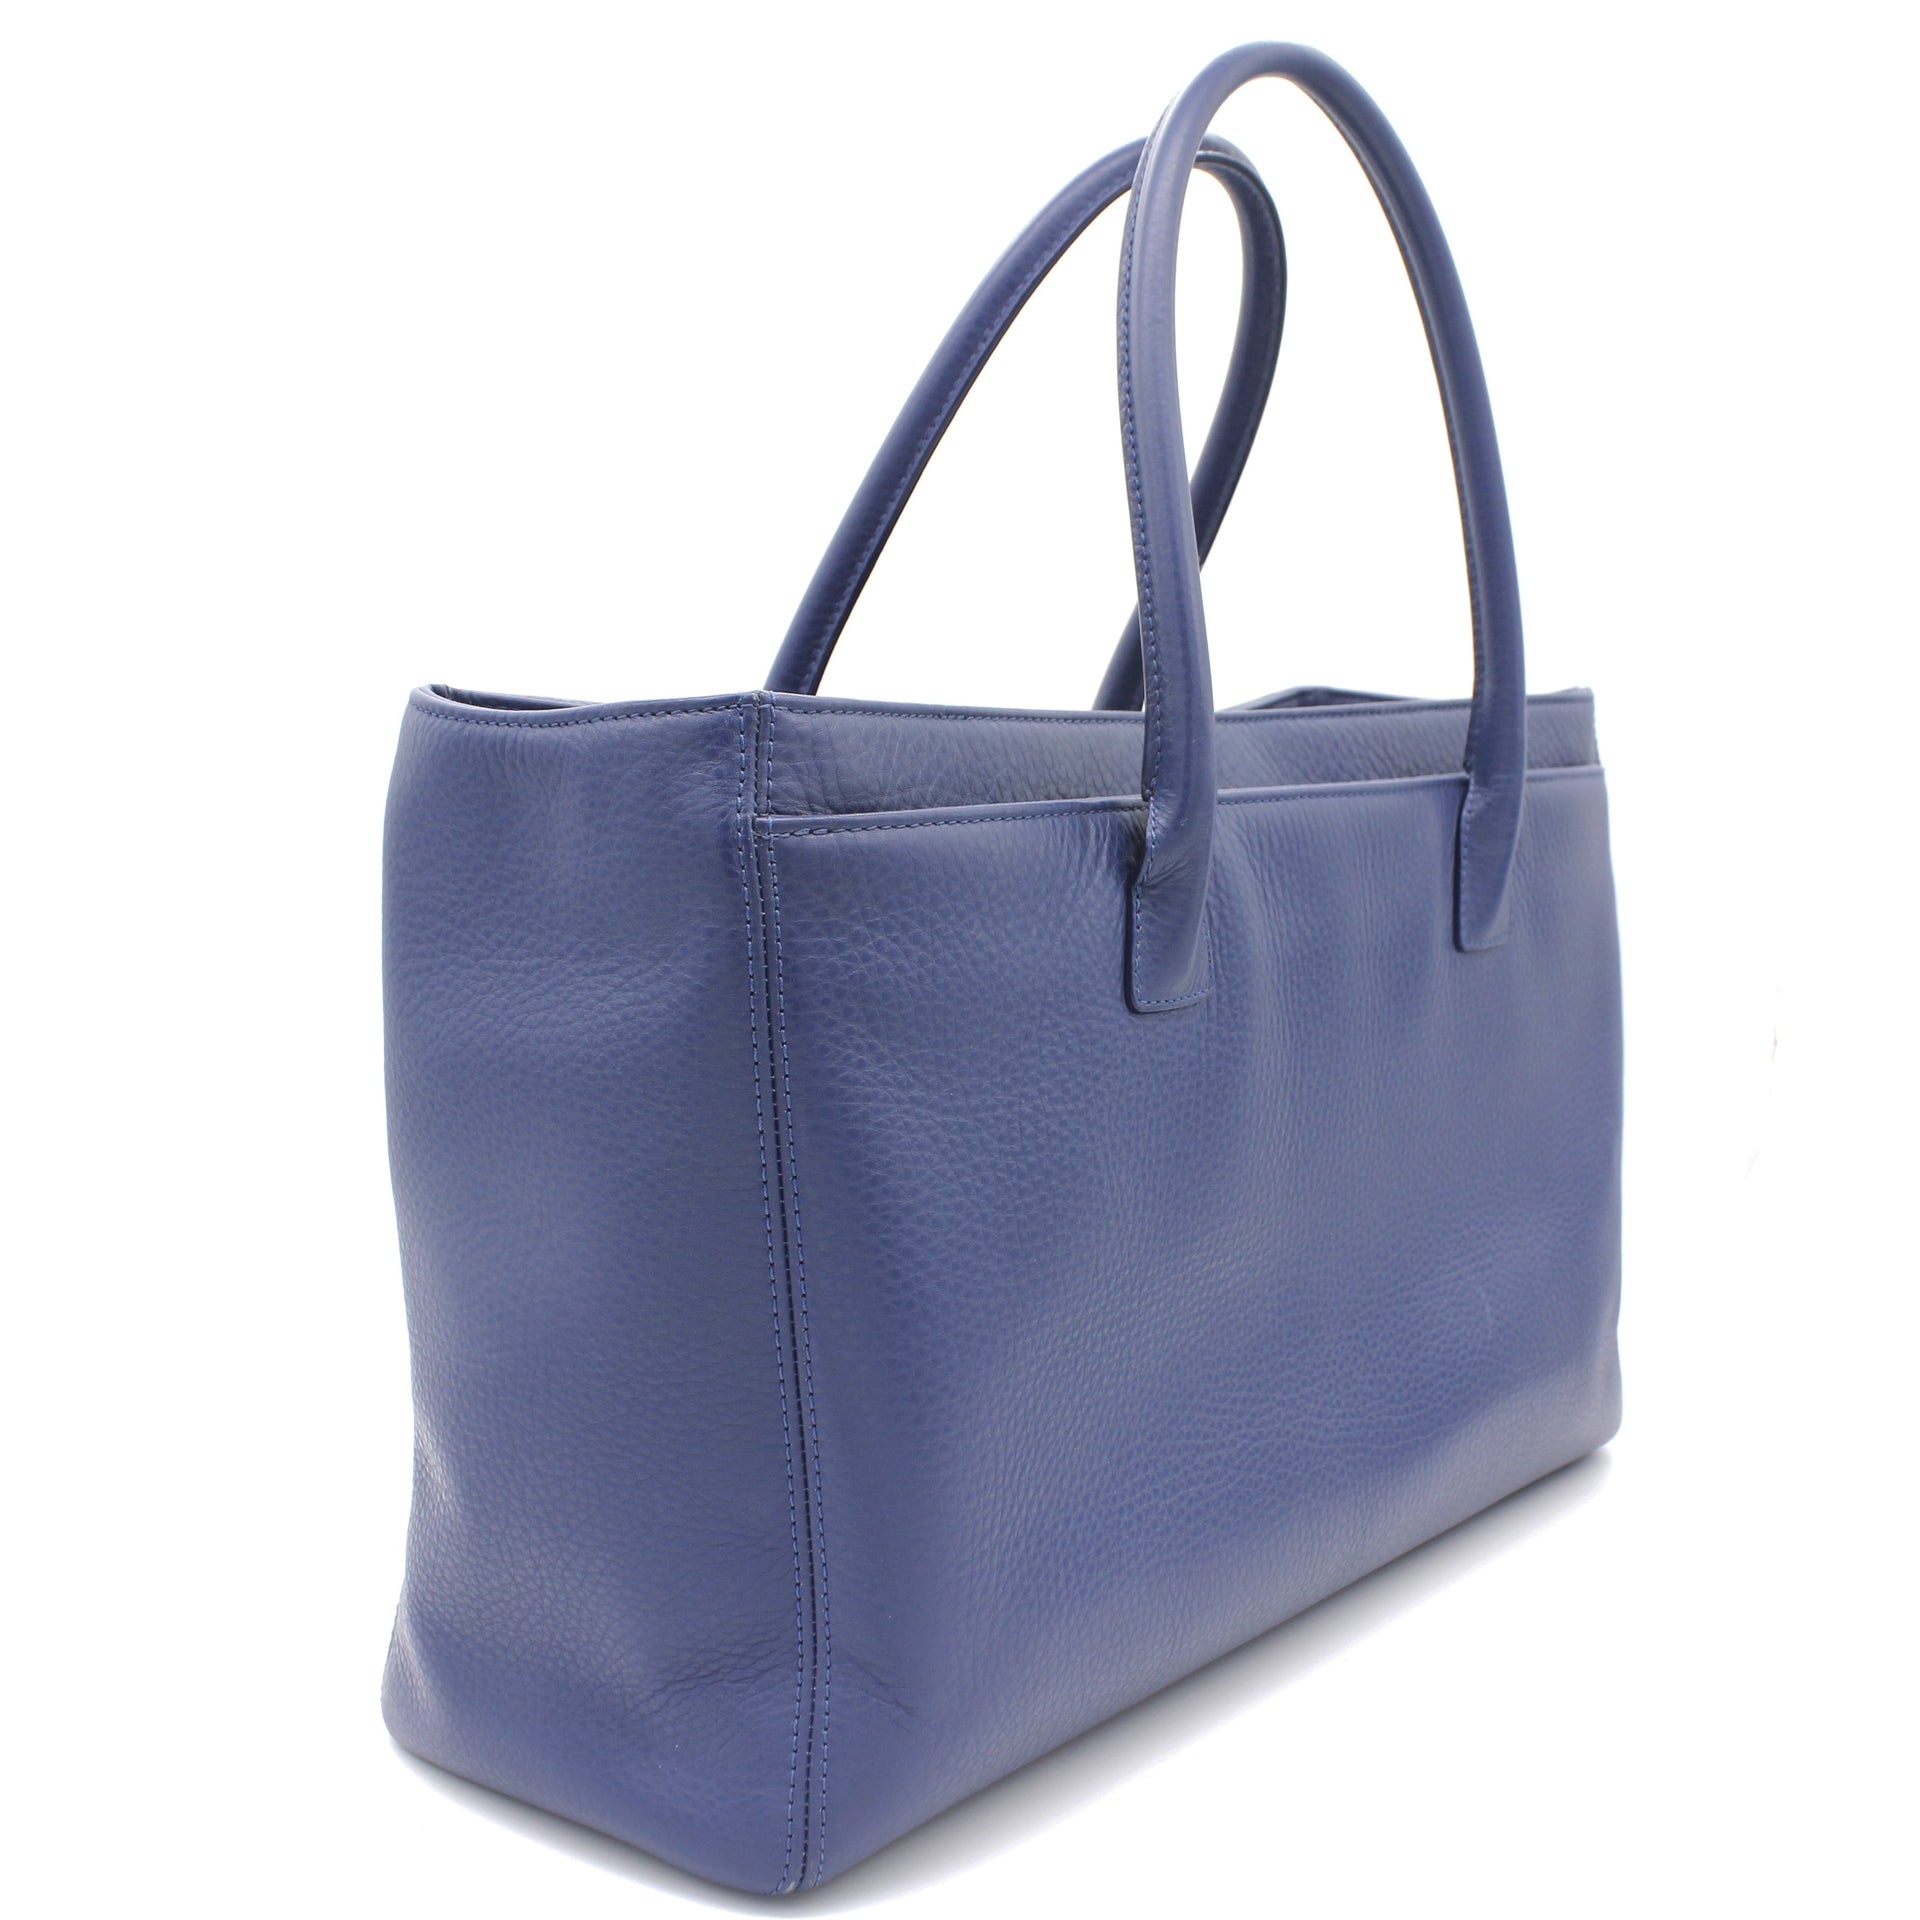 Executive Cerf Tote Navy Blue